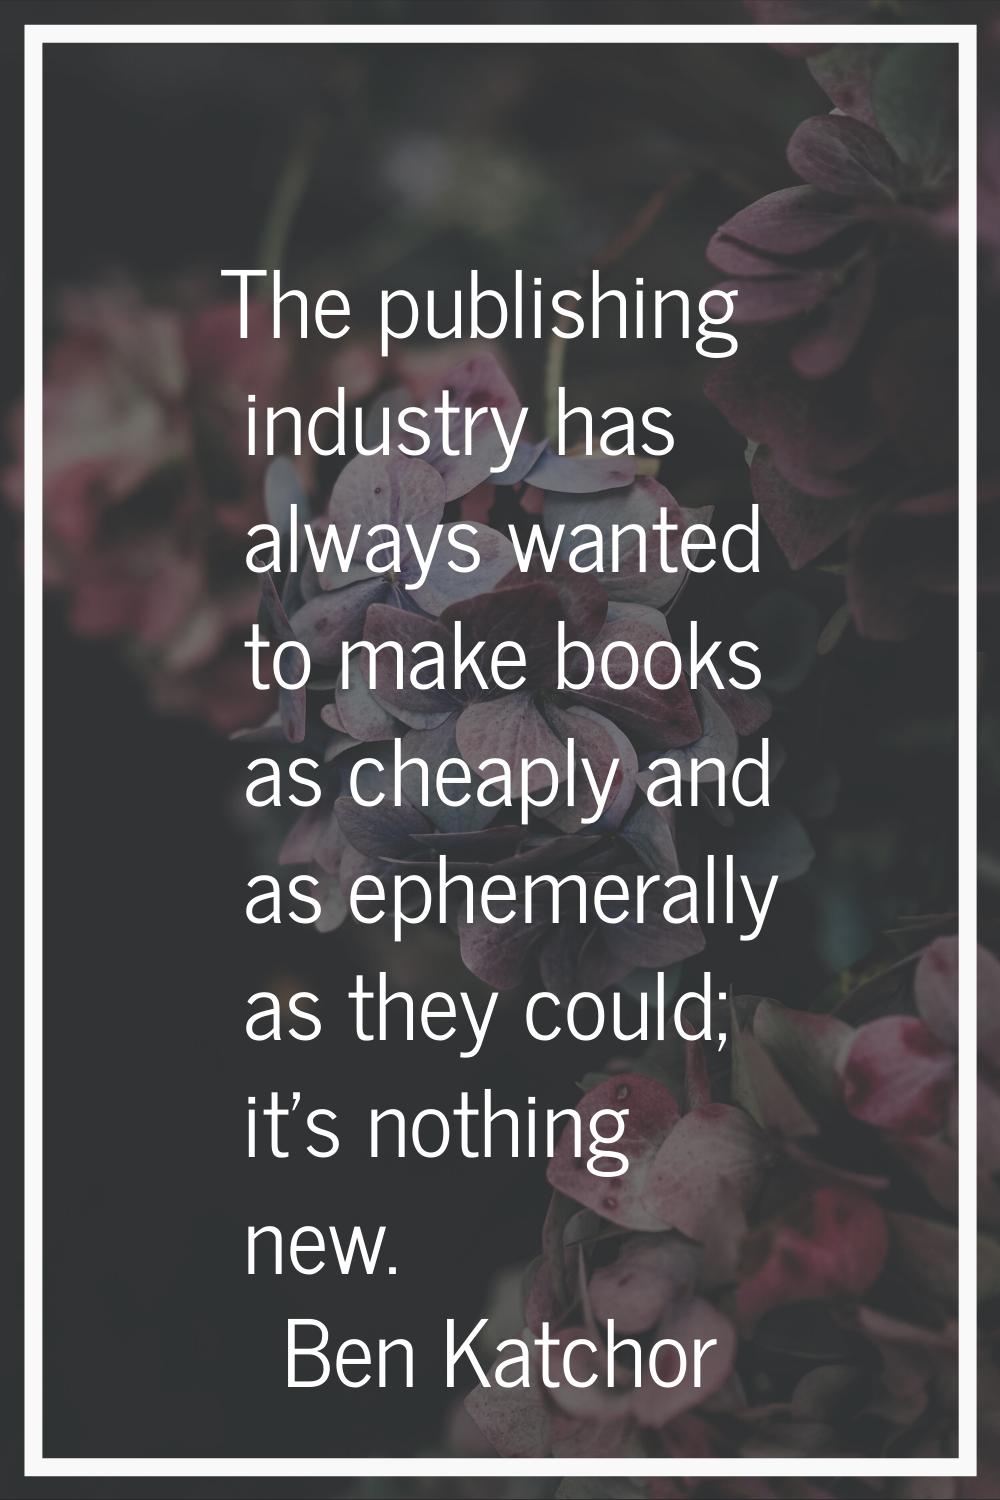 The publishing industry has always wanted to make books as cheaply and as ephemerally as they could